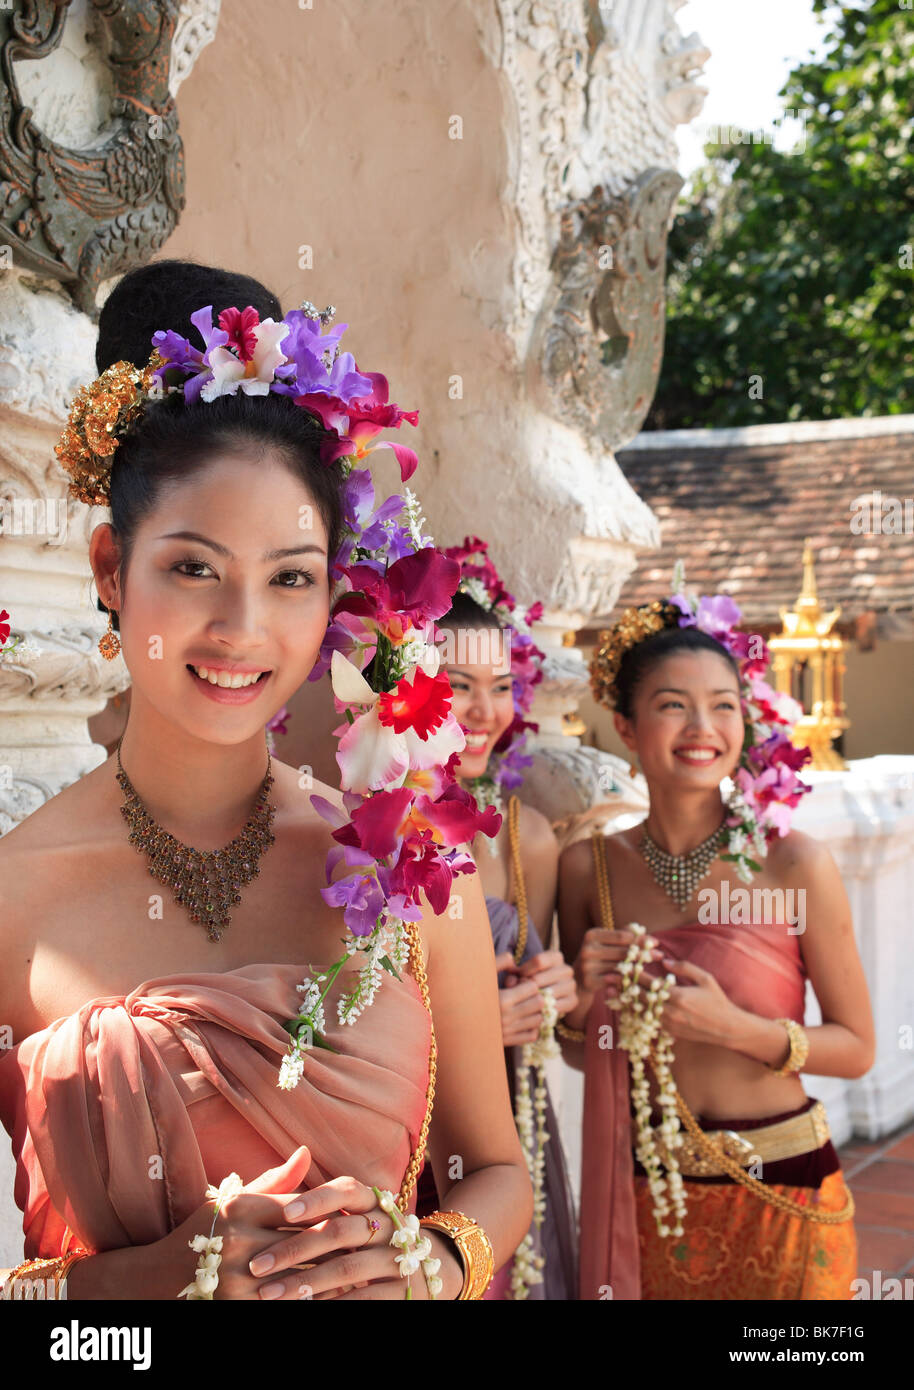 Thai girls in costume at a festival in Chiang Mai, Thailand, Southeast Asia, Asia Stock Photo